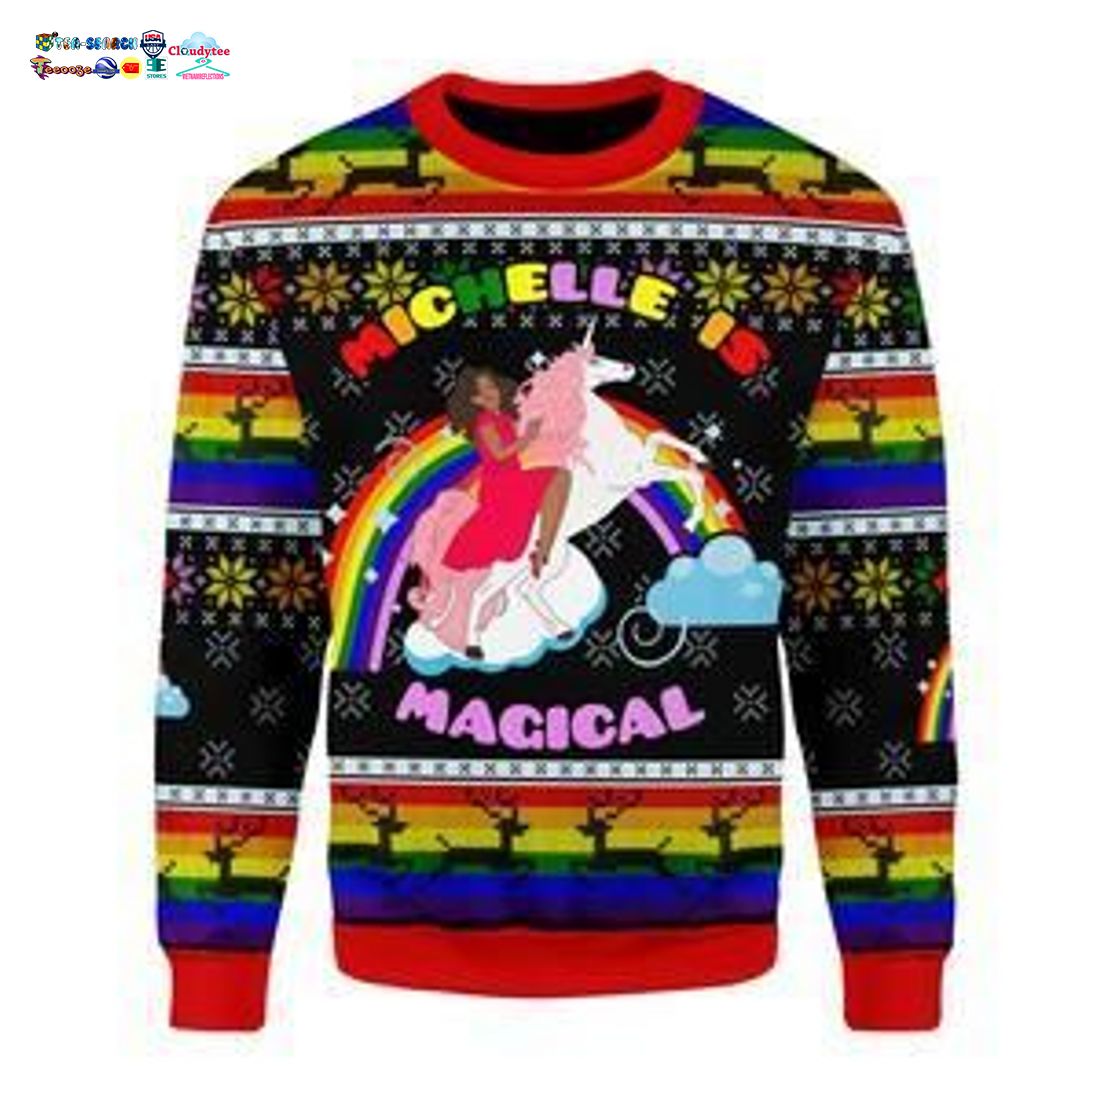 Michelle is Magical Ugly Christmas Sweater